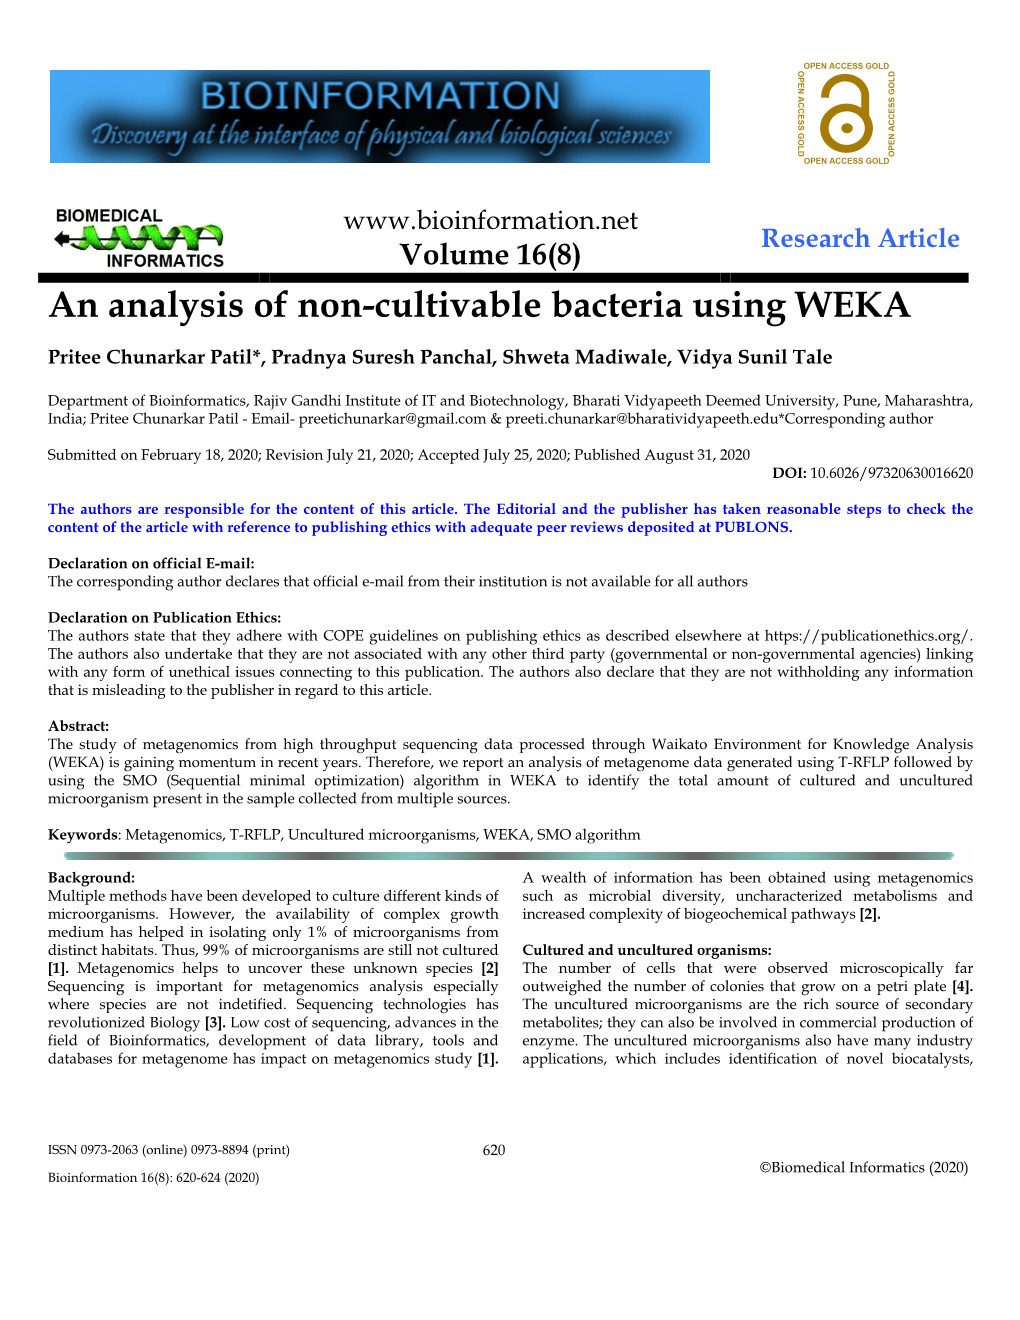 An Analysis of Non-Cultivable Bacteria Using WEKA